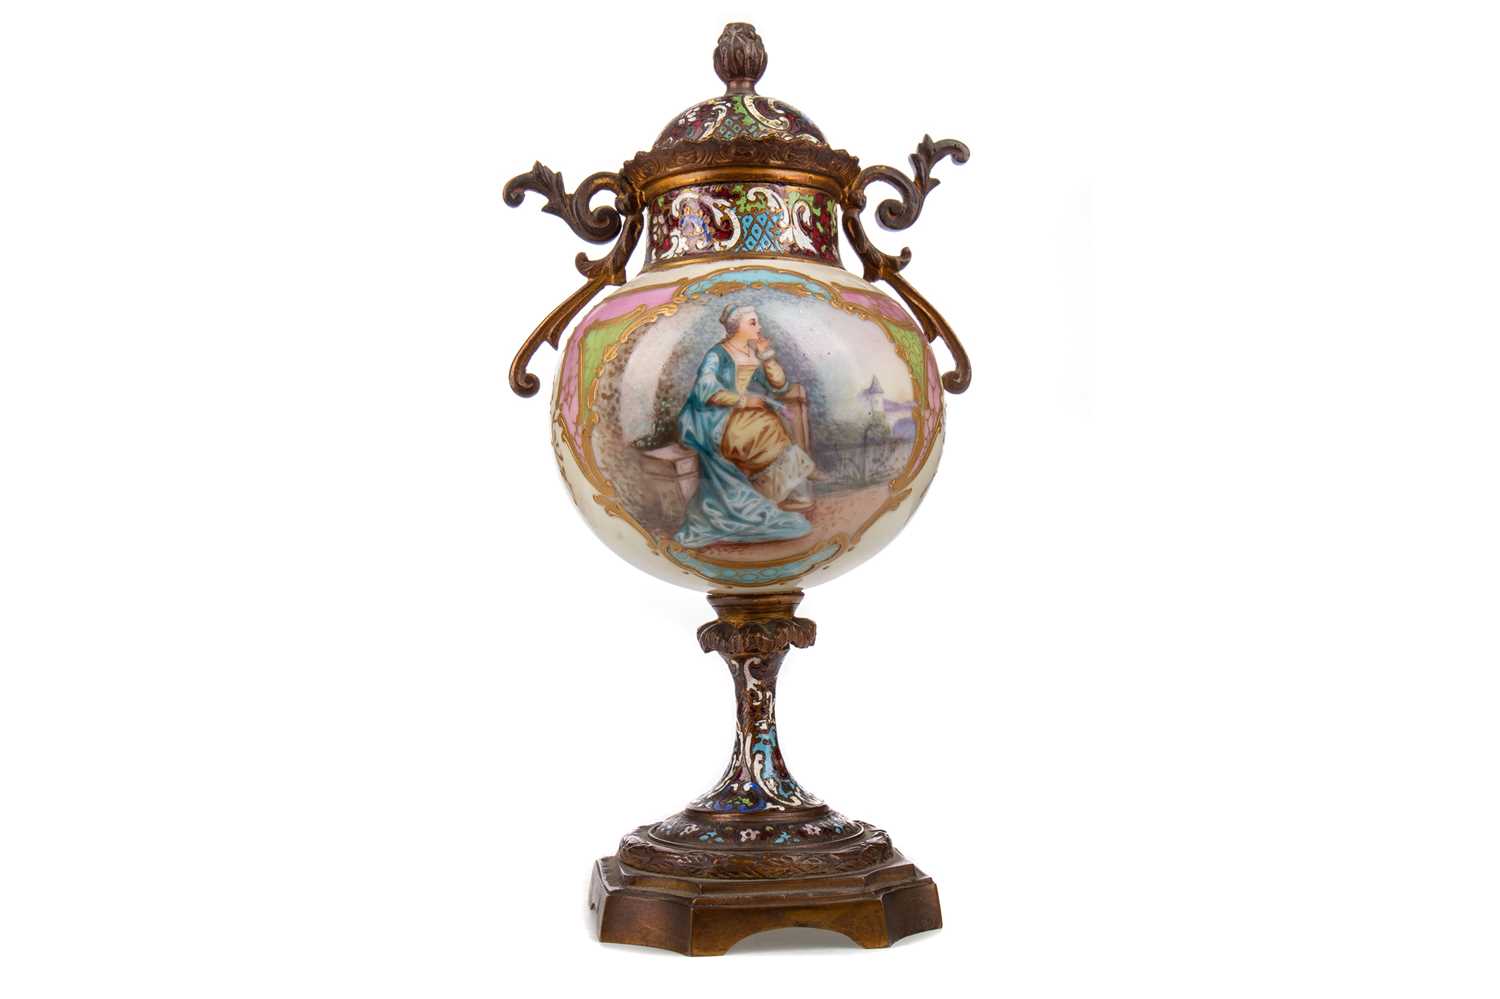 A LATE 19TH CENTURY FRENCH PORCELAIN, GILT METAL AND CHAMPLEVE ENAMEL URN